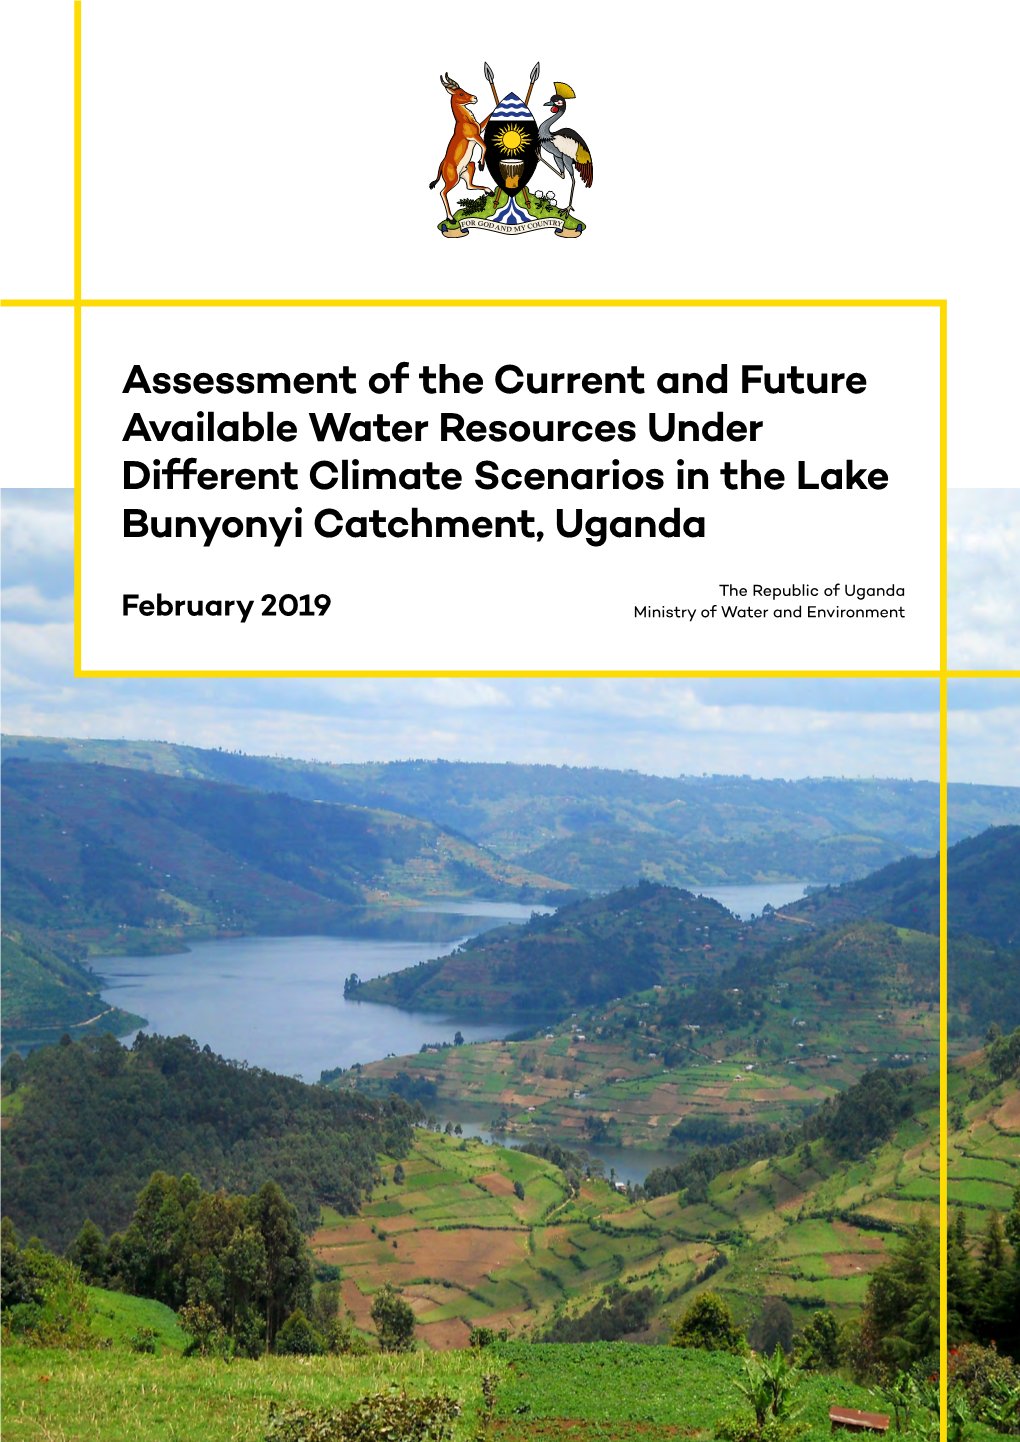 Assessment of the Current and Future Available Water Resources Under Different Climate Scenarios in the Lake Bunyonyi Catchment, Uganda